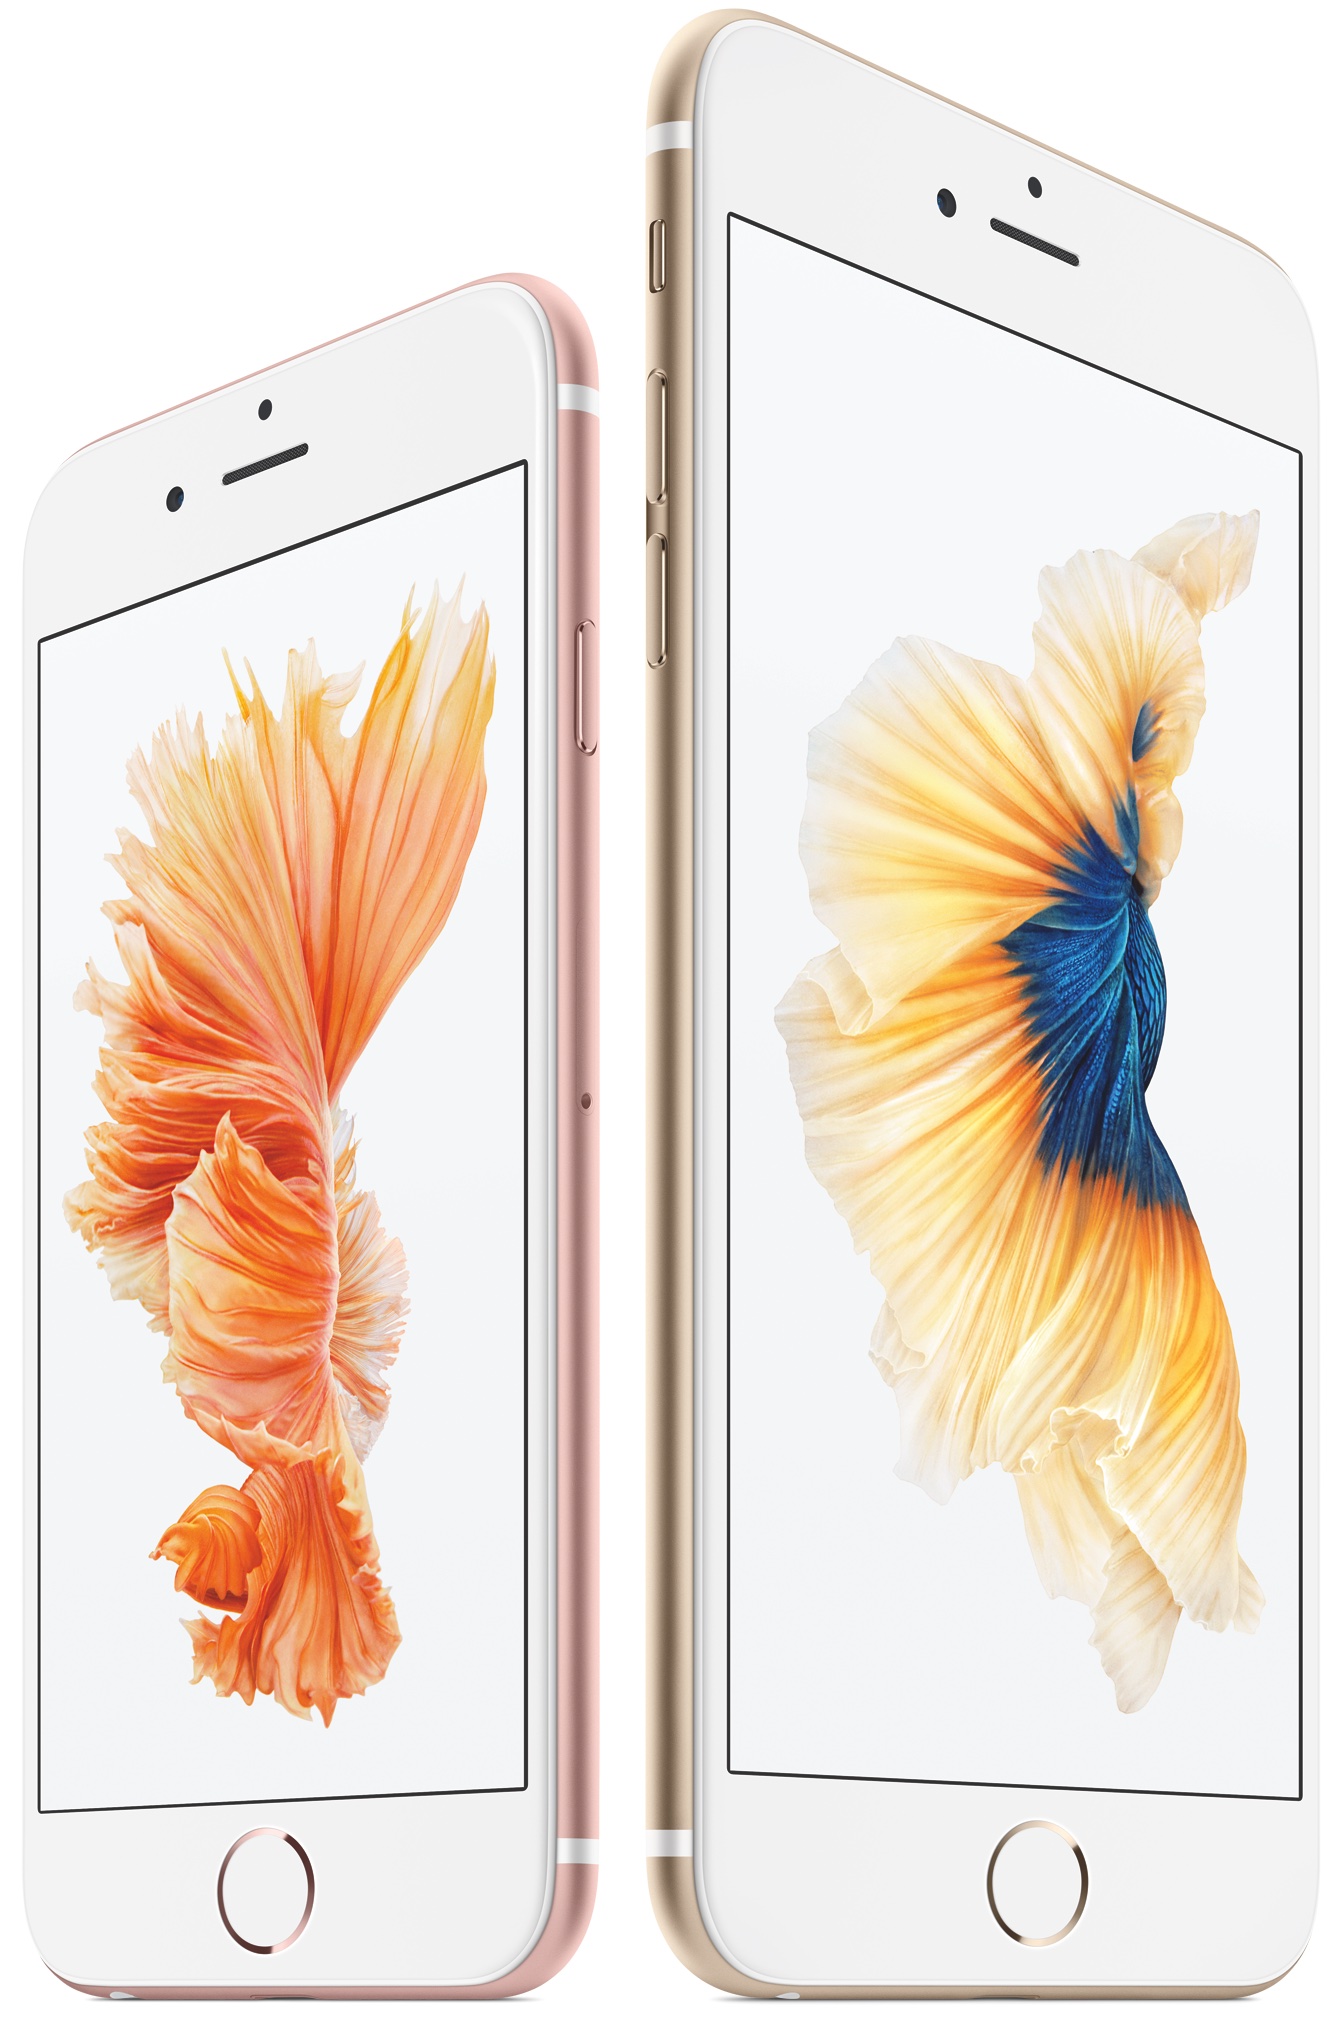 iPhone 6s iPhone 6s Plus two up front image 003